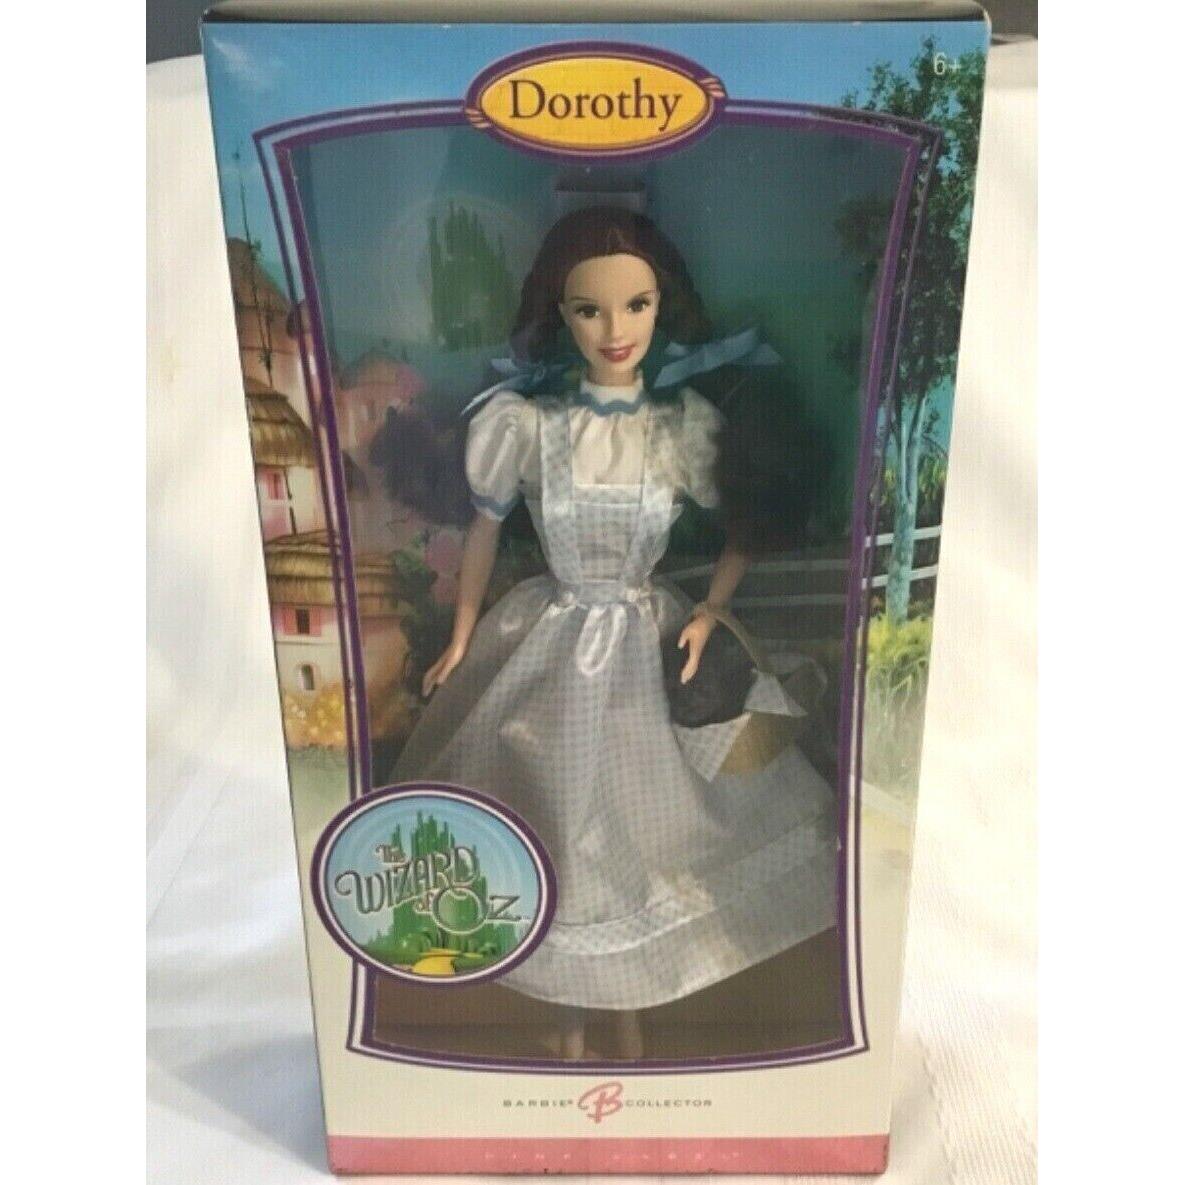 Dorothy The Wizard of Oz Barbie Collector Doll 2006 Pink Label K8682 Gale